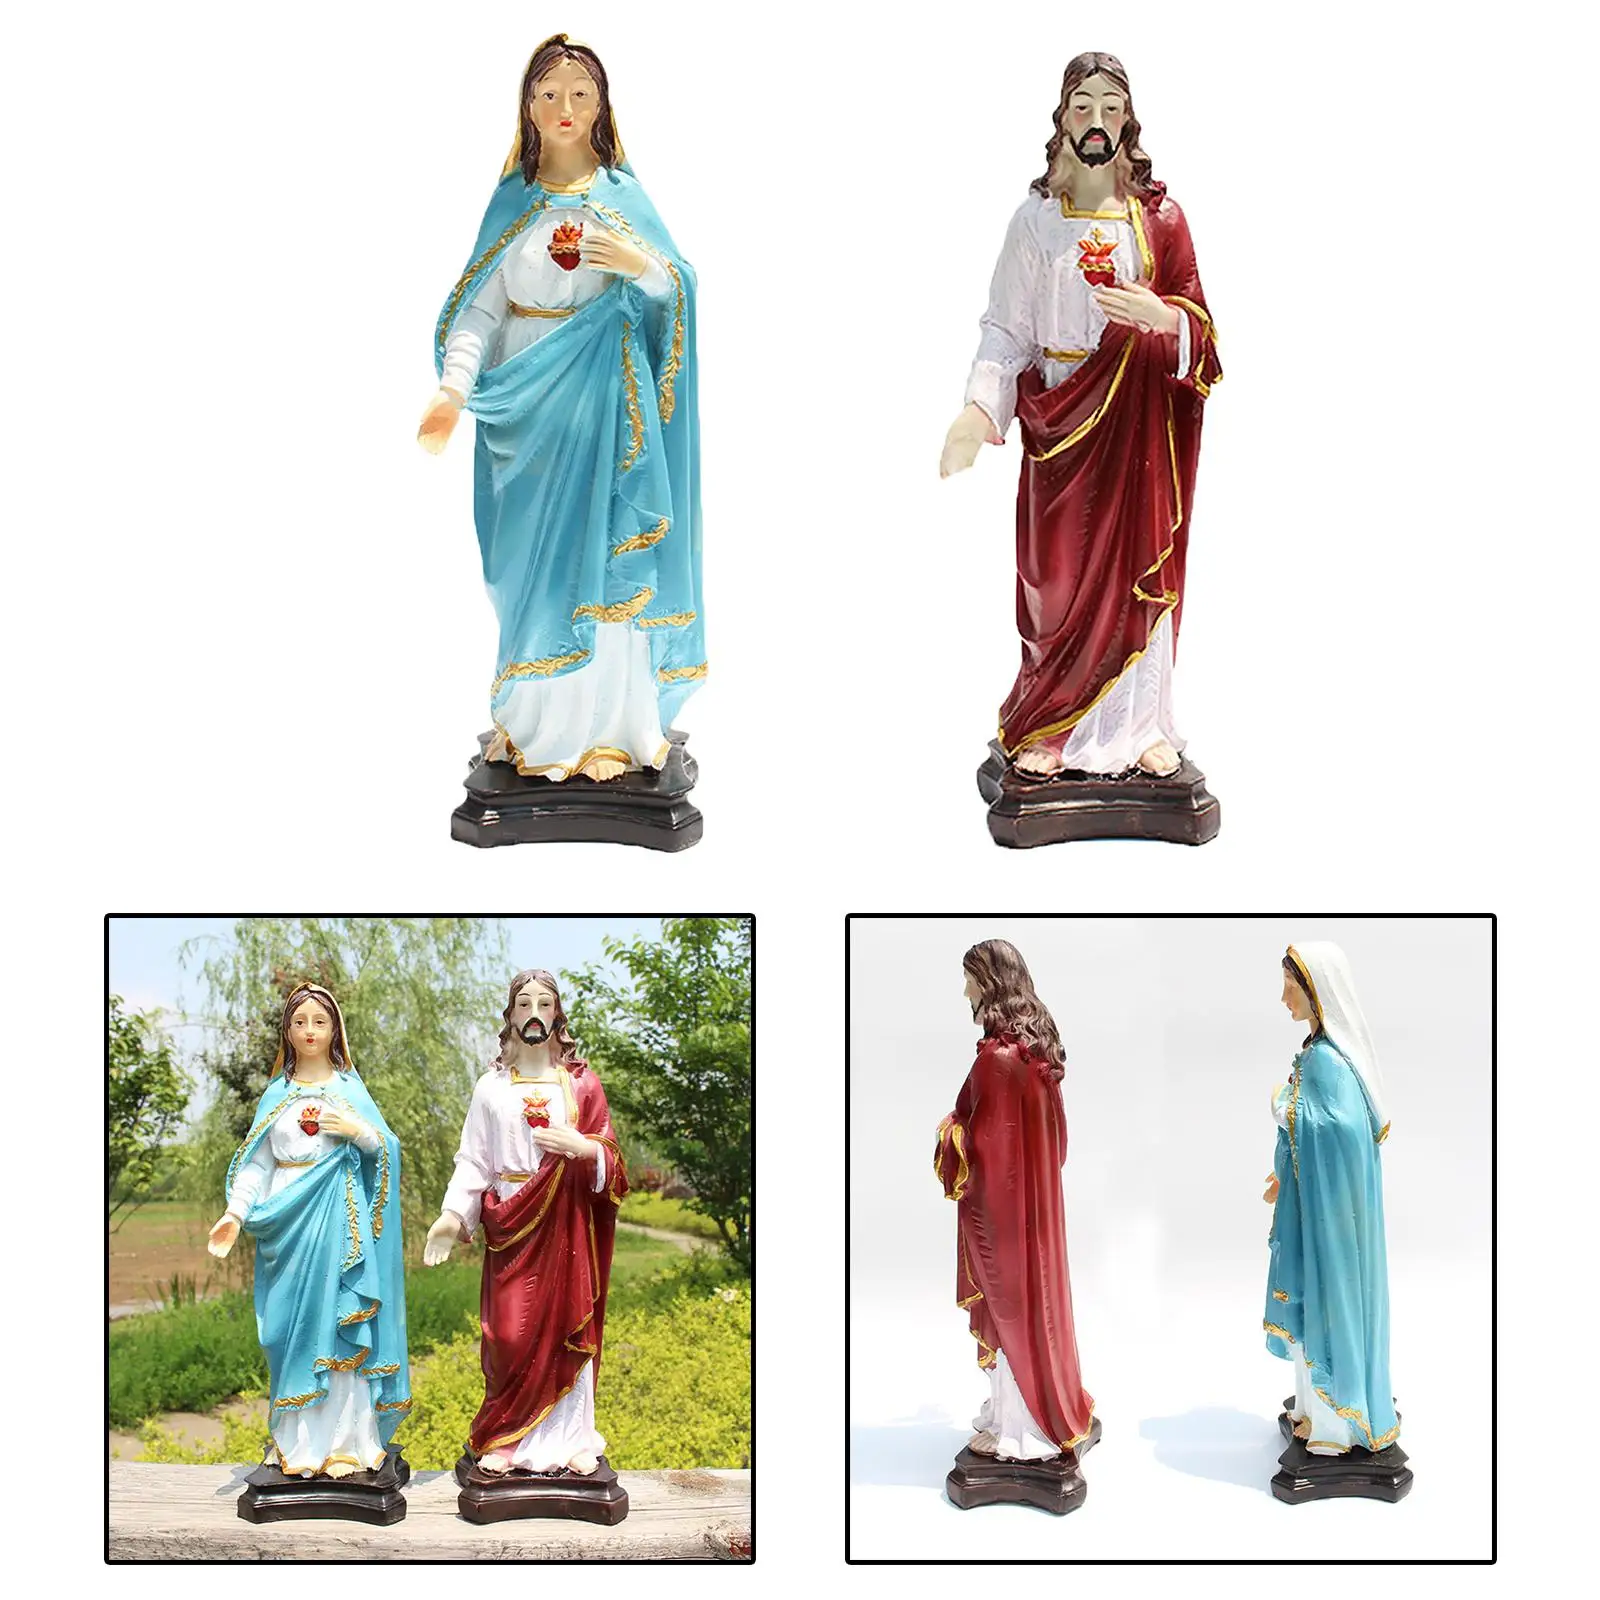 2x Resin Sacred Holy Family Jesus and Virgin Mary Figurine Christ Statues Religious Christian Home Ornament Collectibles